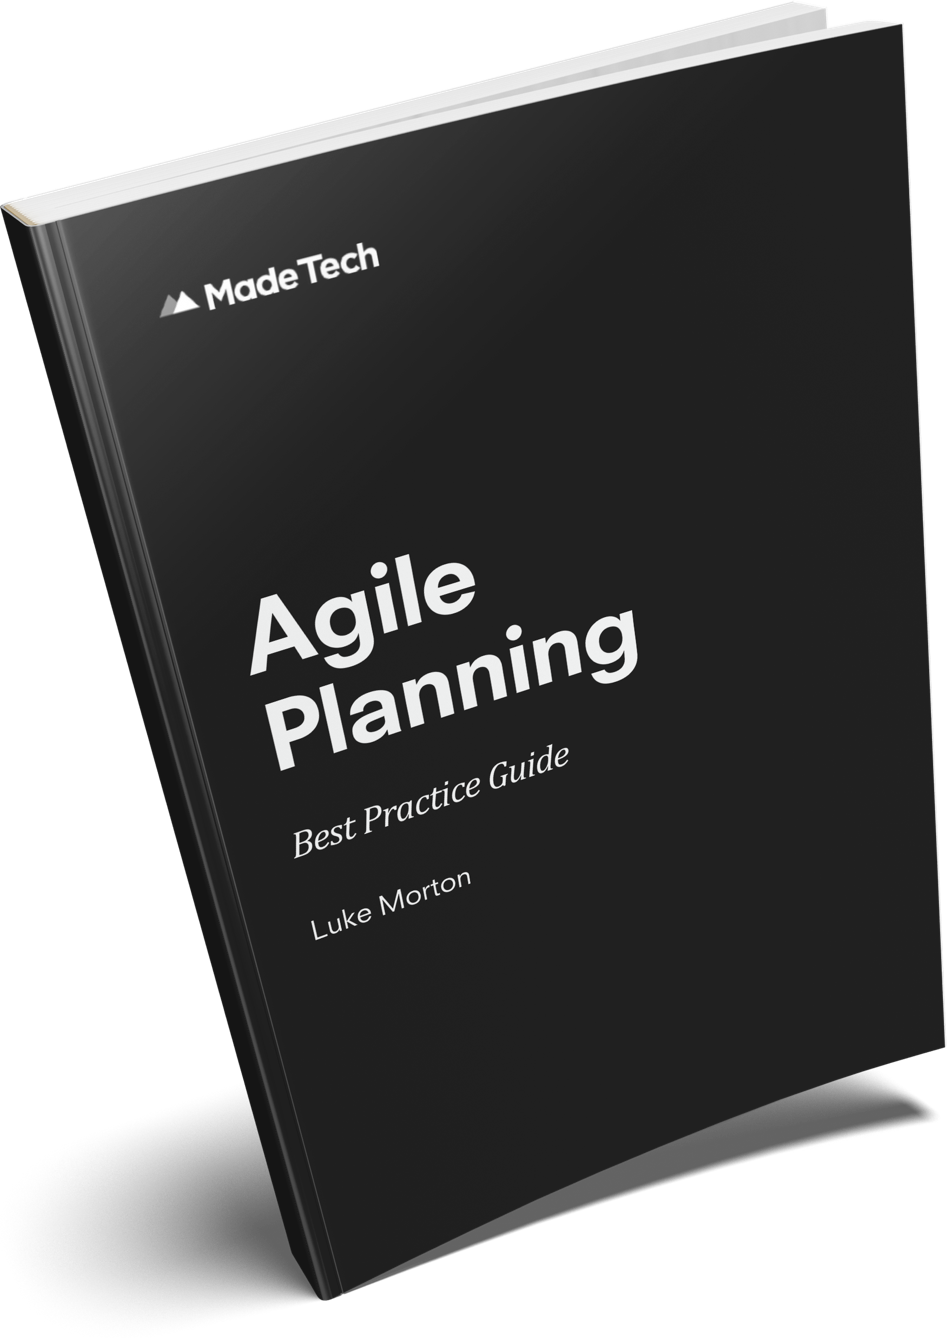 Agile Planning Best Practice Guide book cover